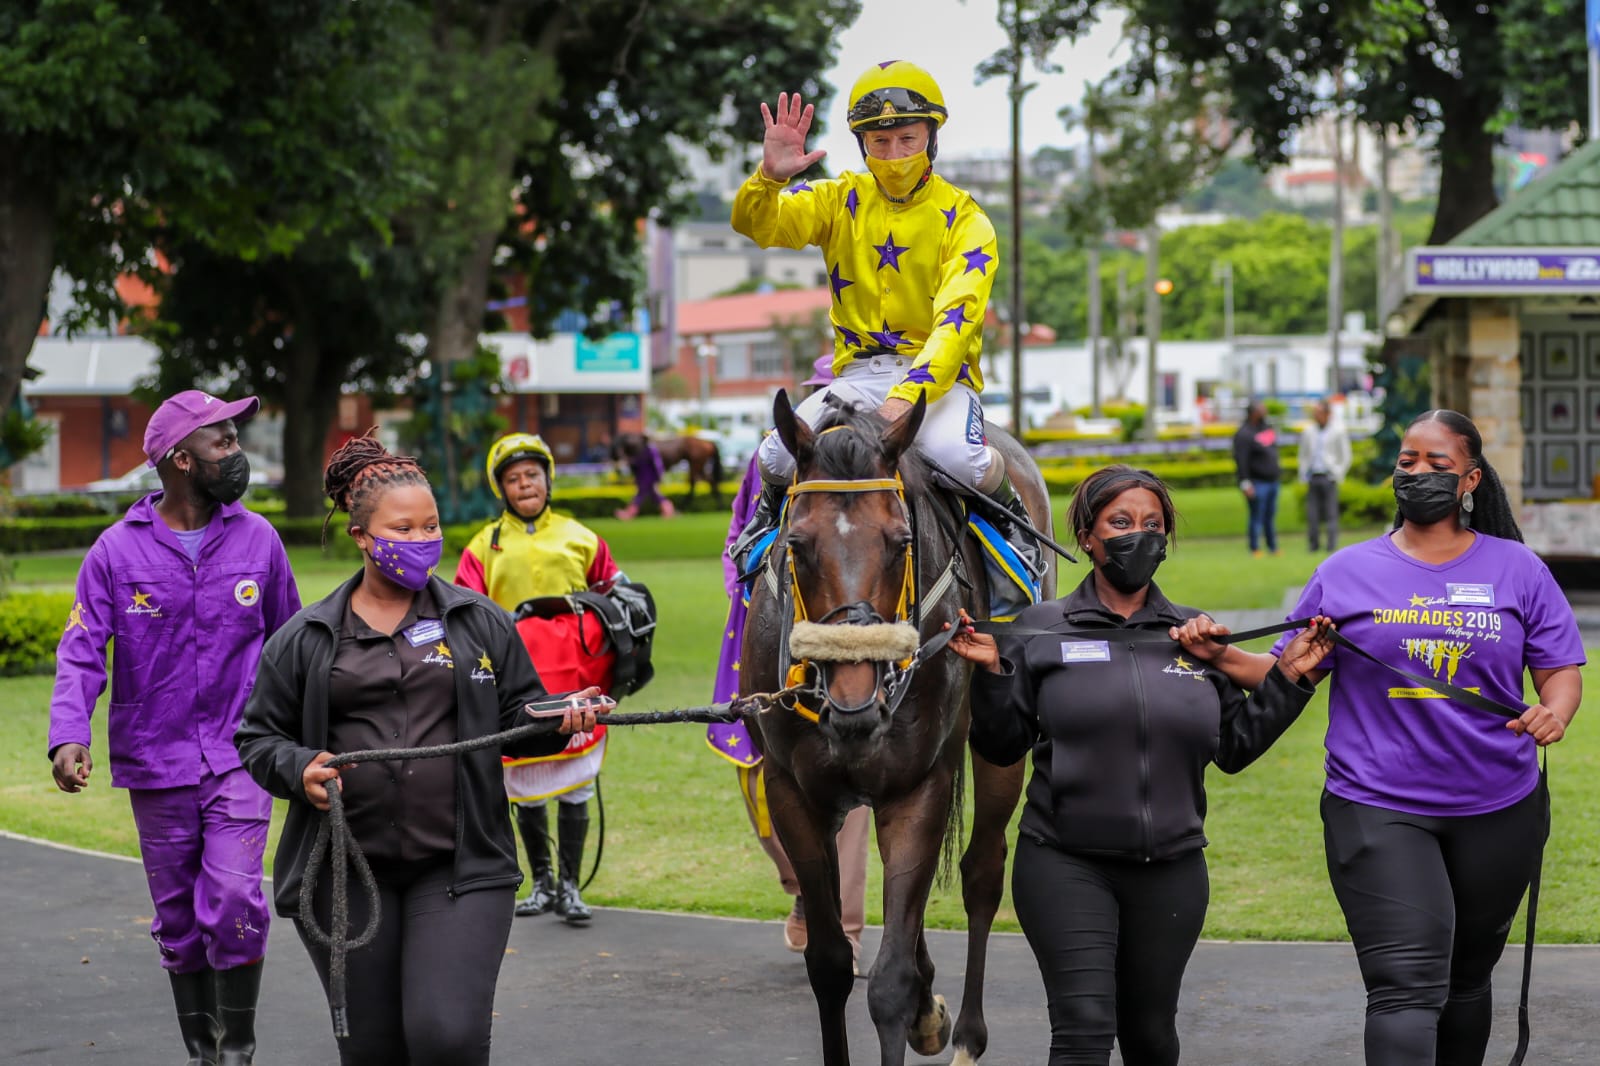 Horse being led in by people after winning a race